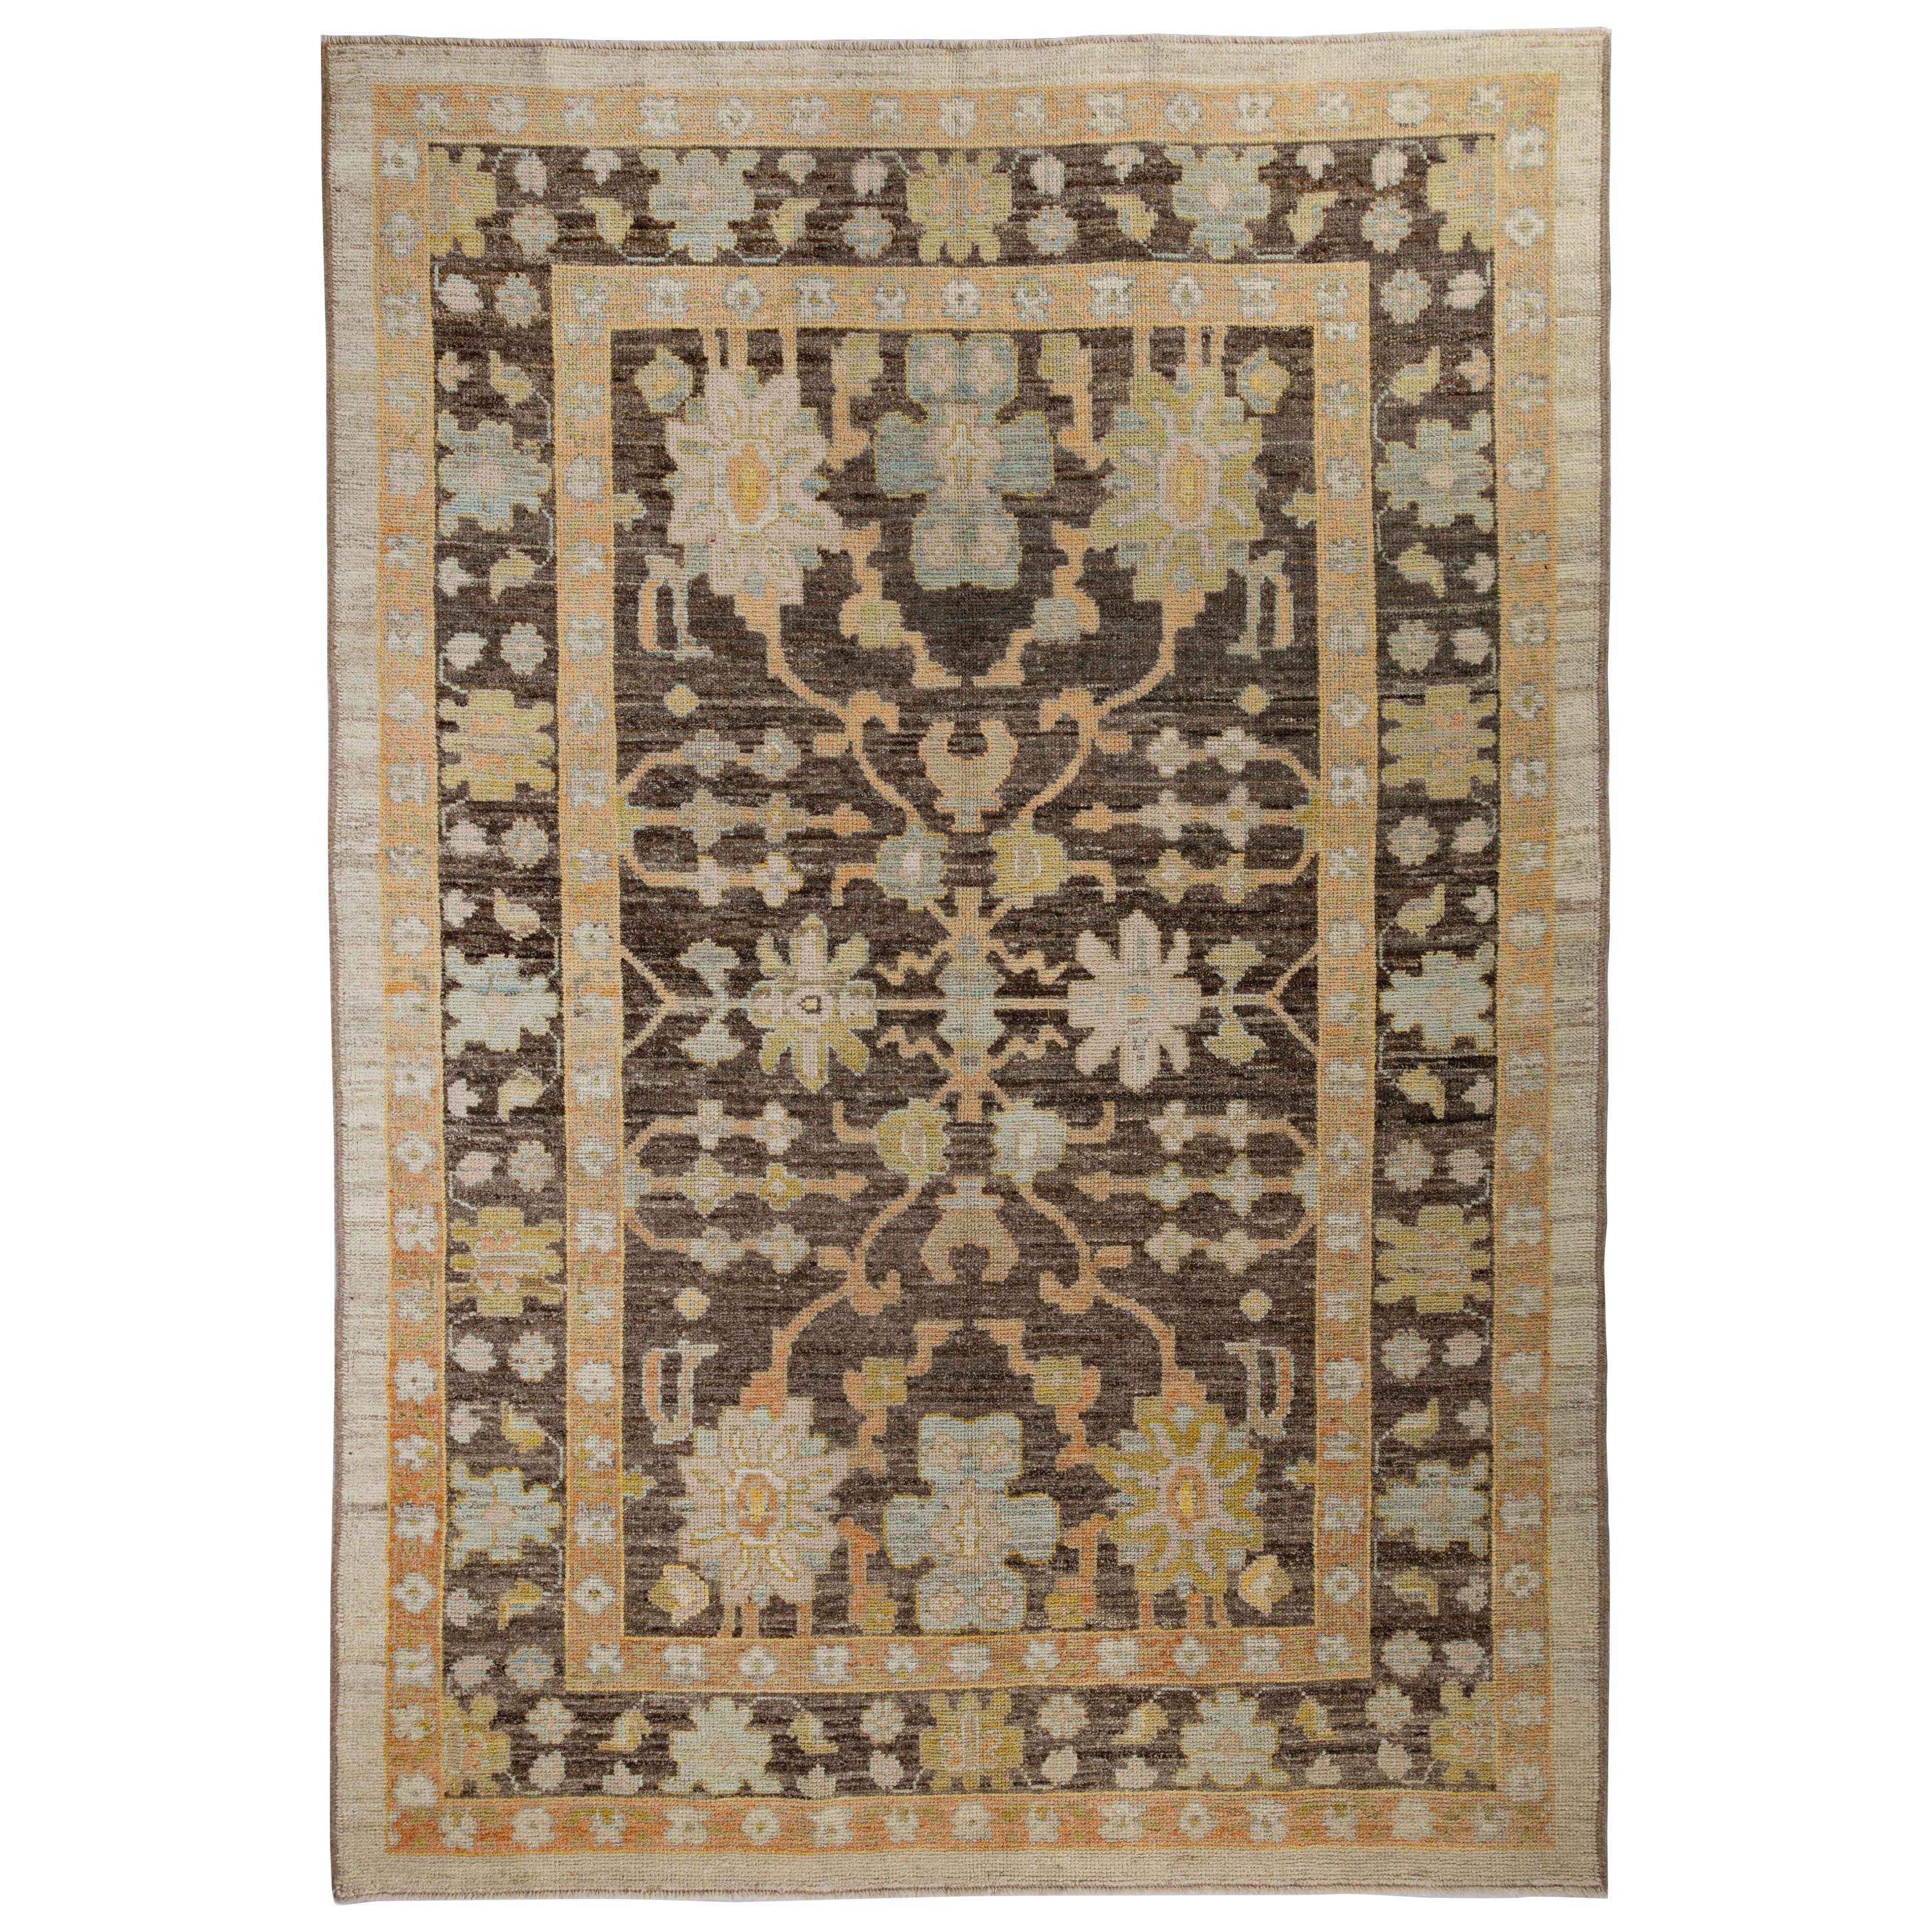 Contemporary Turkish Oushak Rug with Brown Field and Flower Head Details